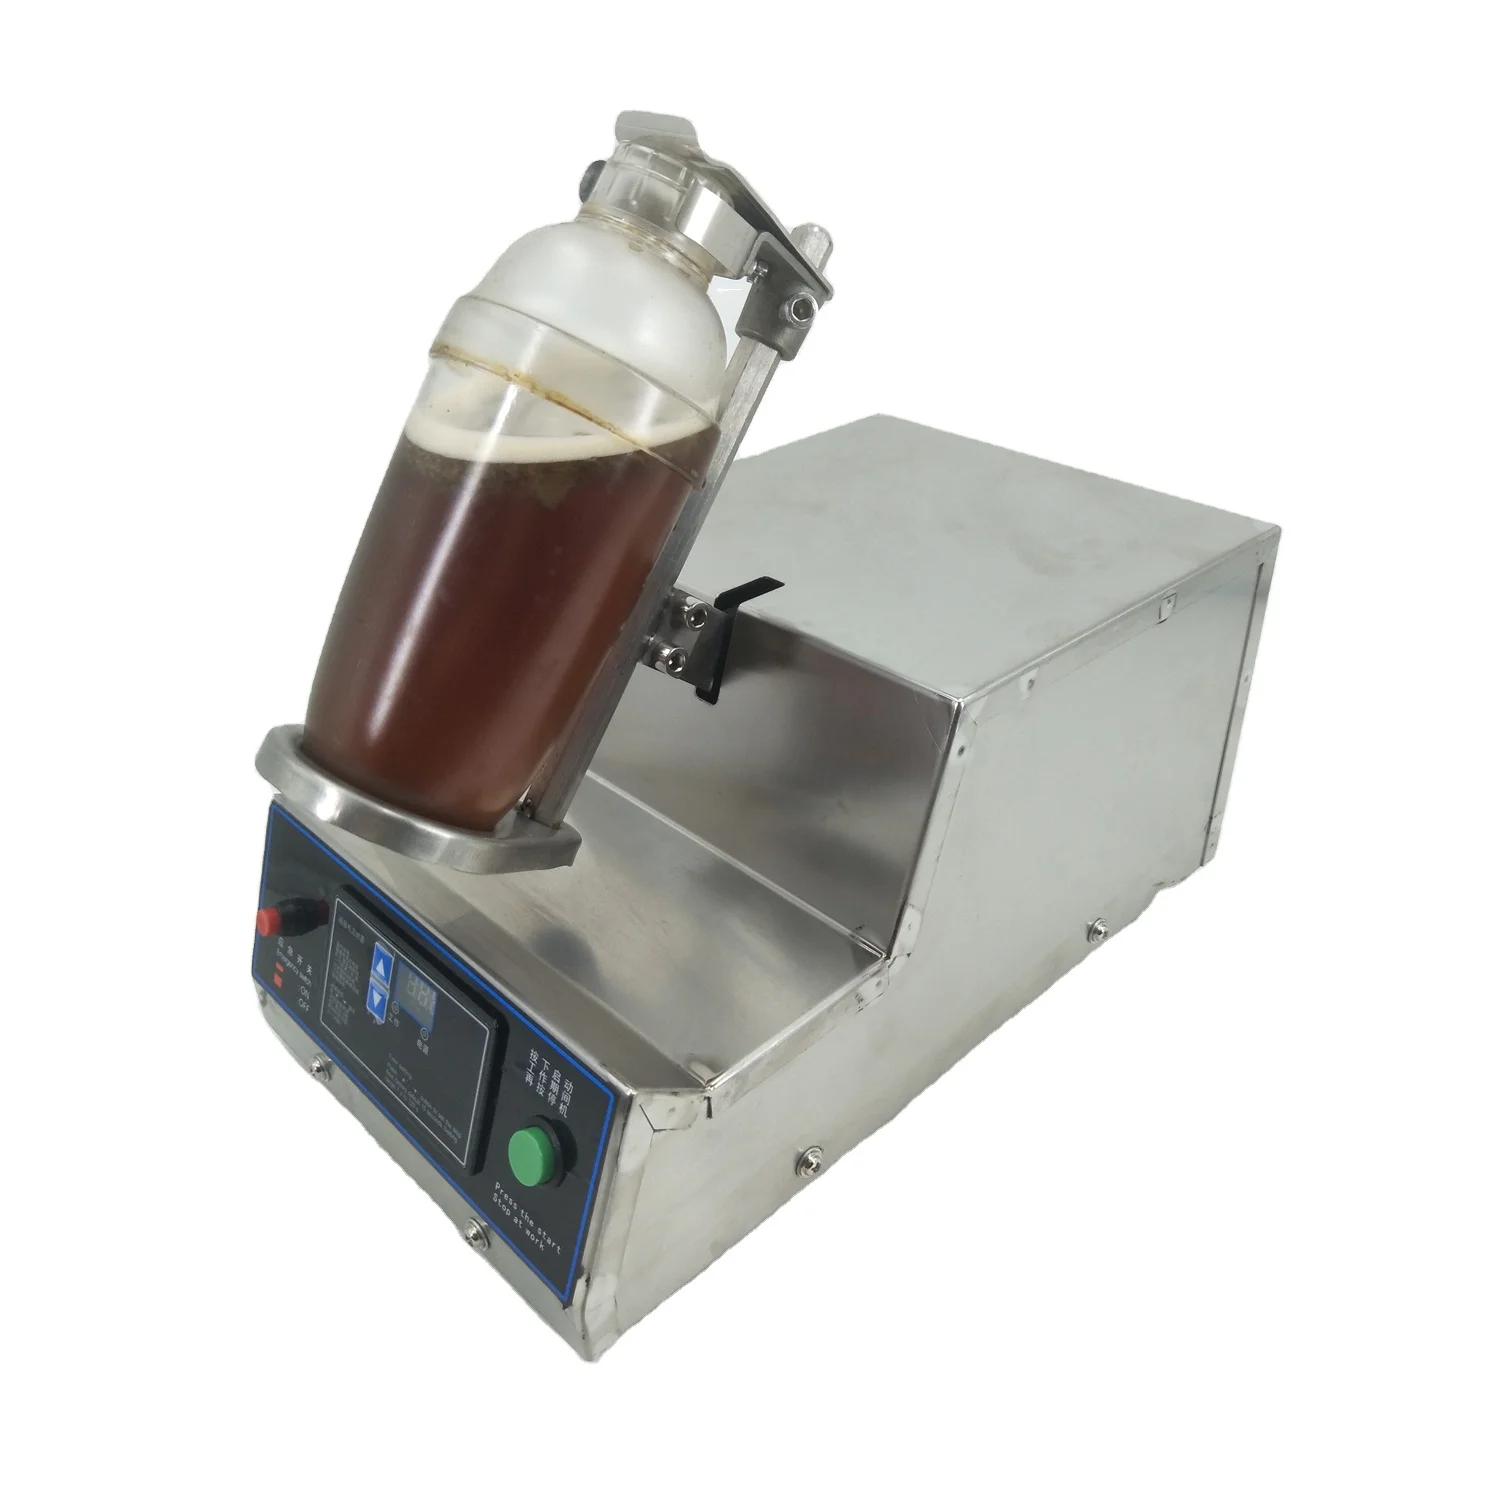 Automatic Milk Tea Shaking Machine, Electric Double Frame Milk Tea And  Cocktail Shaker, 400r/Min, Stainless Steel & Double Cups For For Bubble  Tea